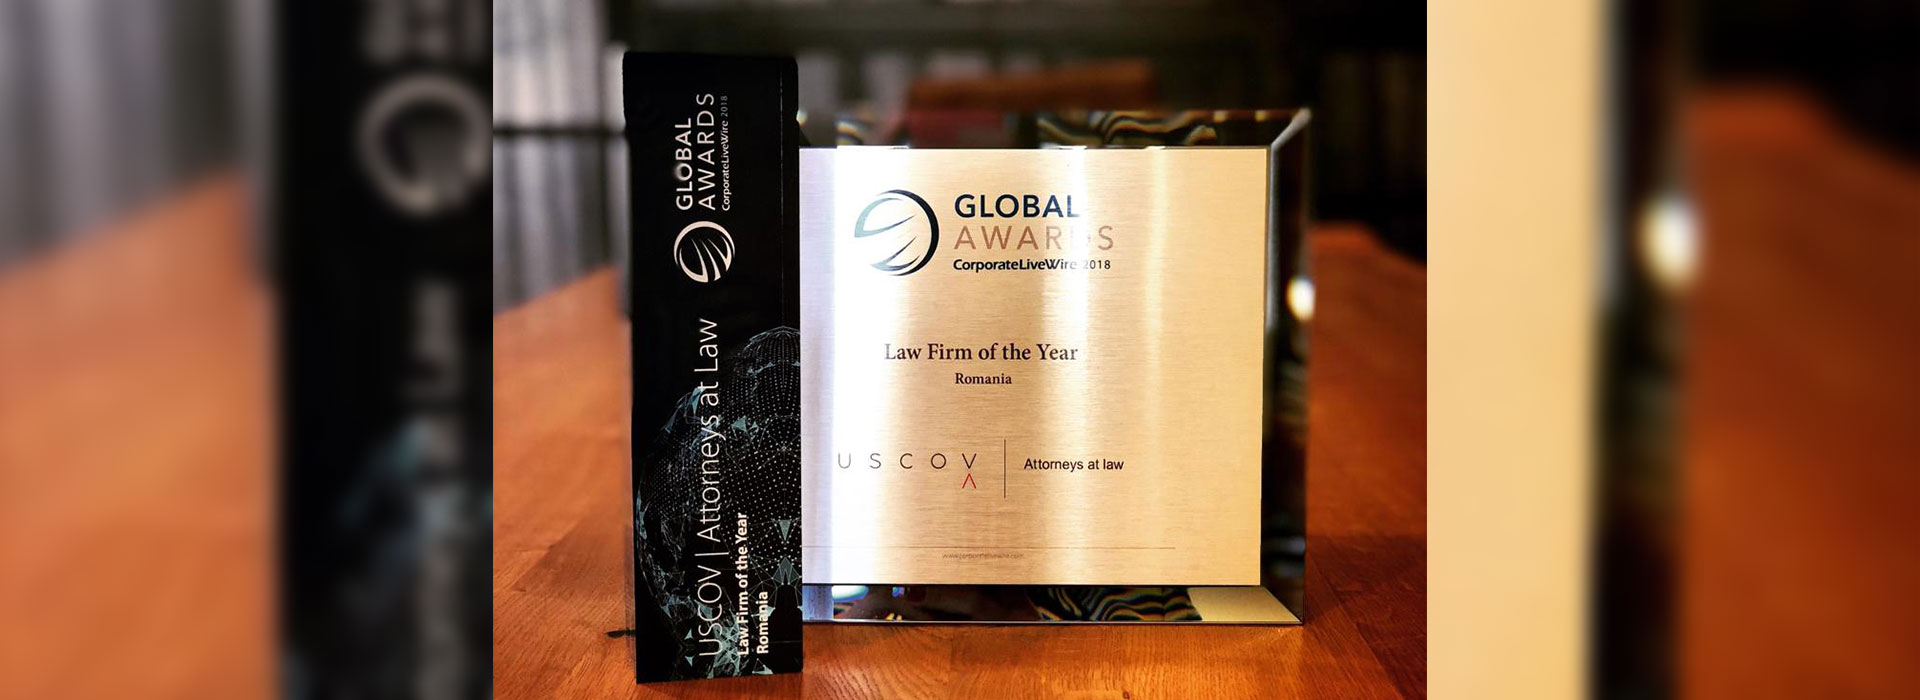 USCOV | Attorneys At Law is the Winner of “Law Firm of The Year” 2018 Award